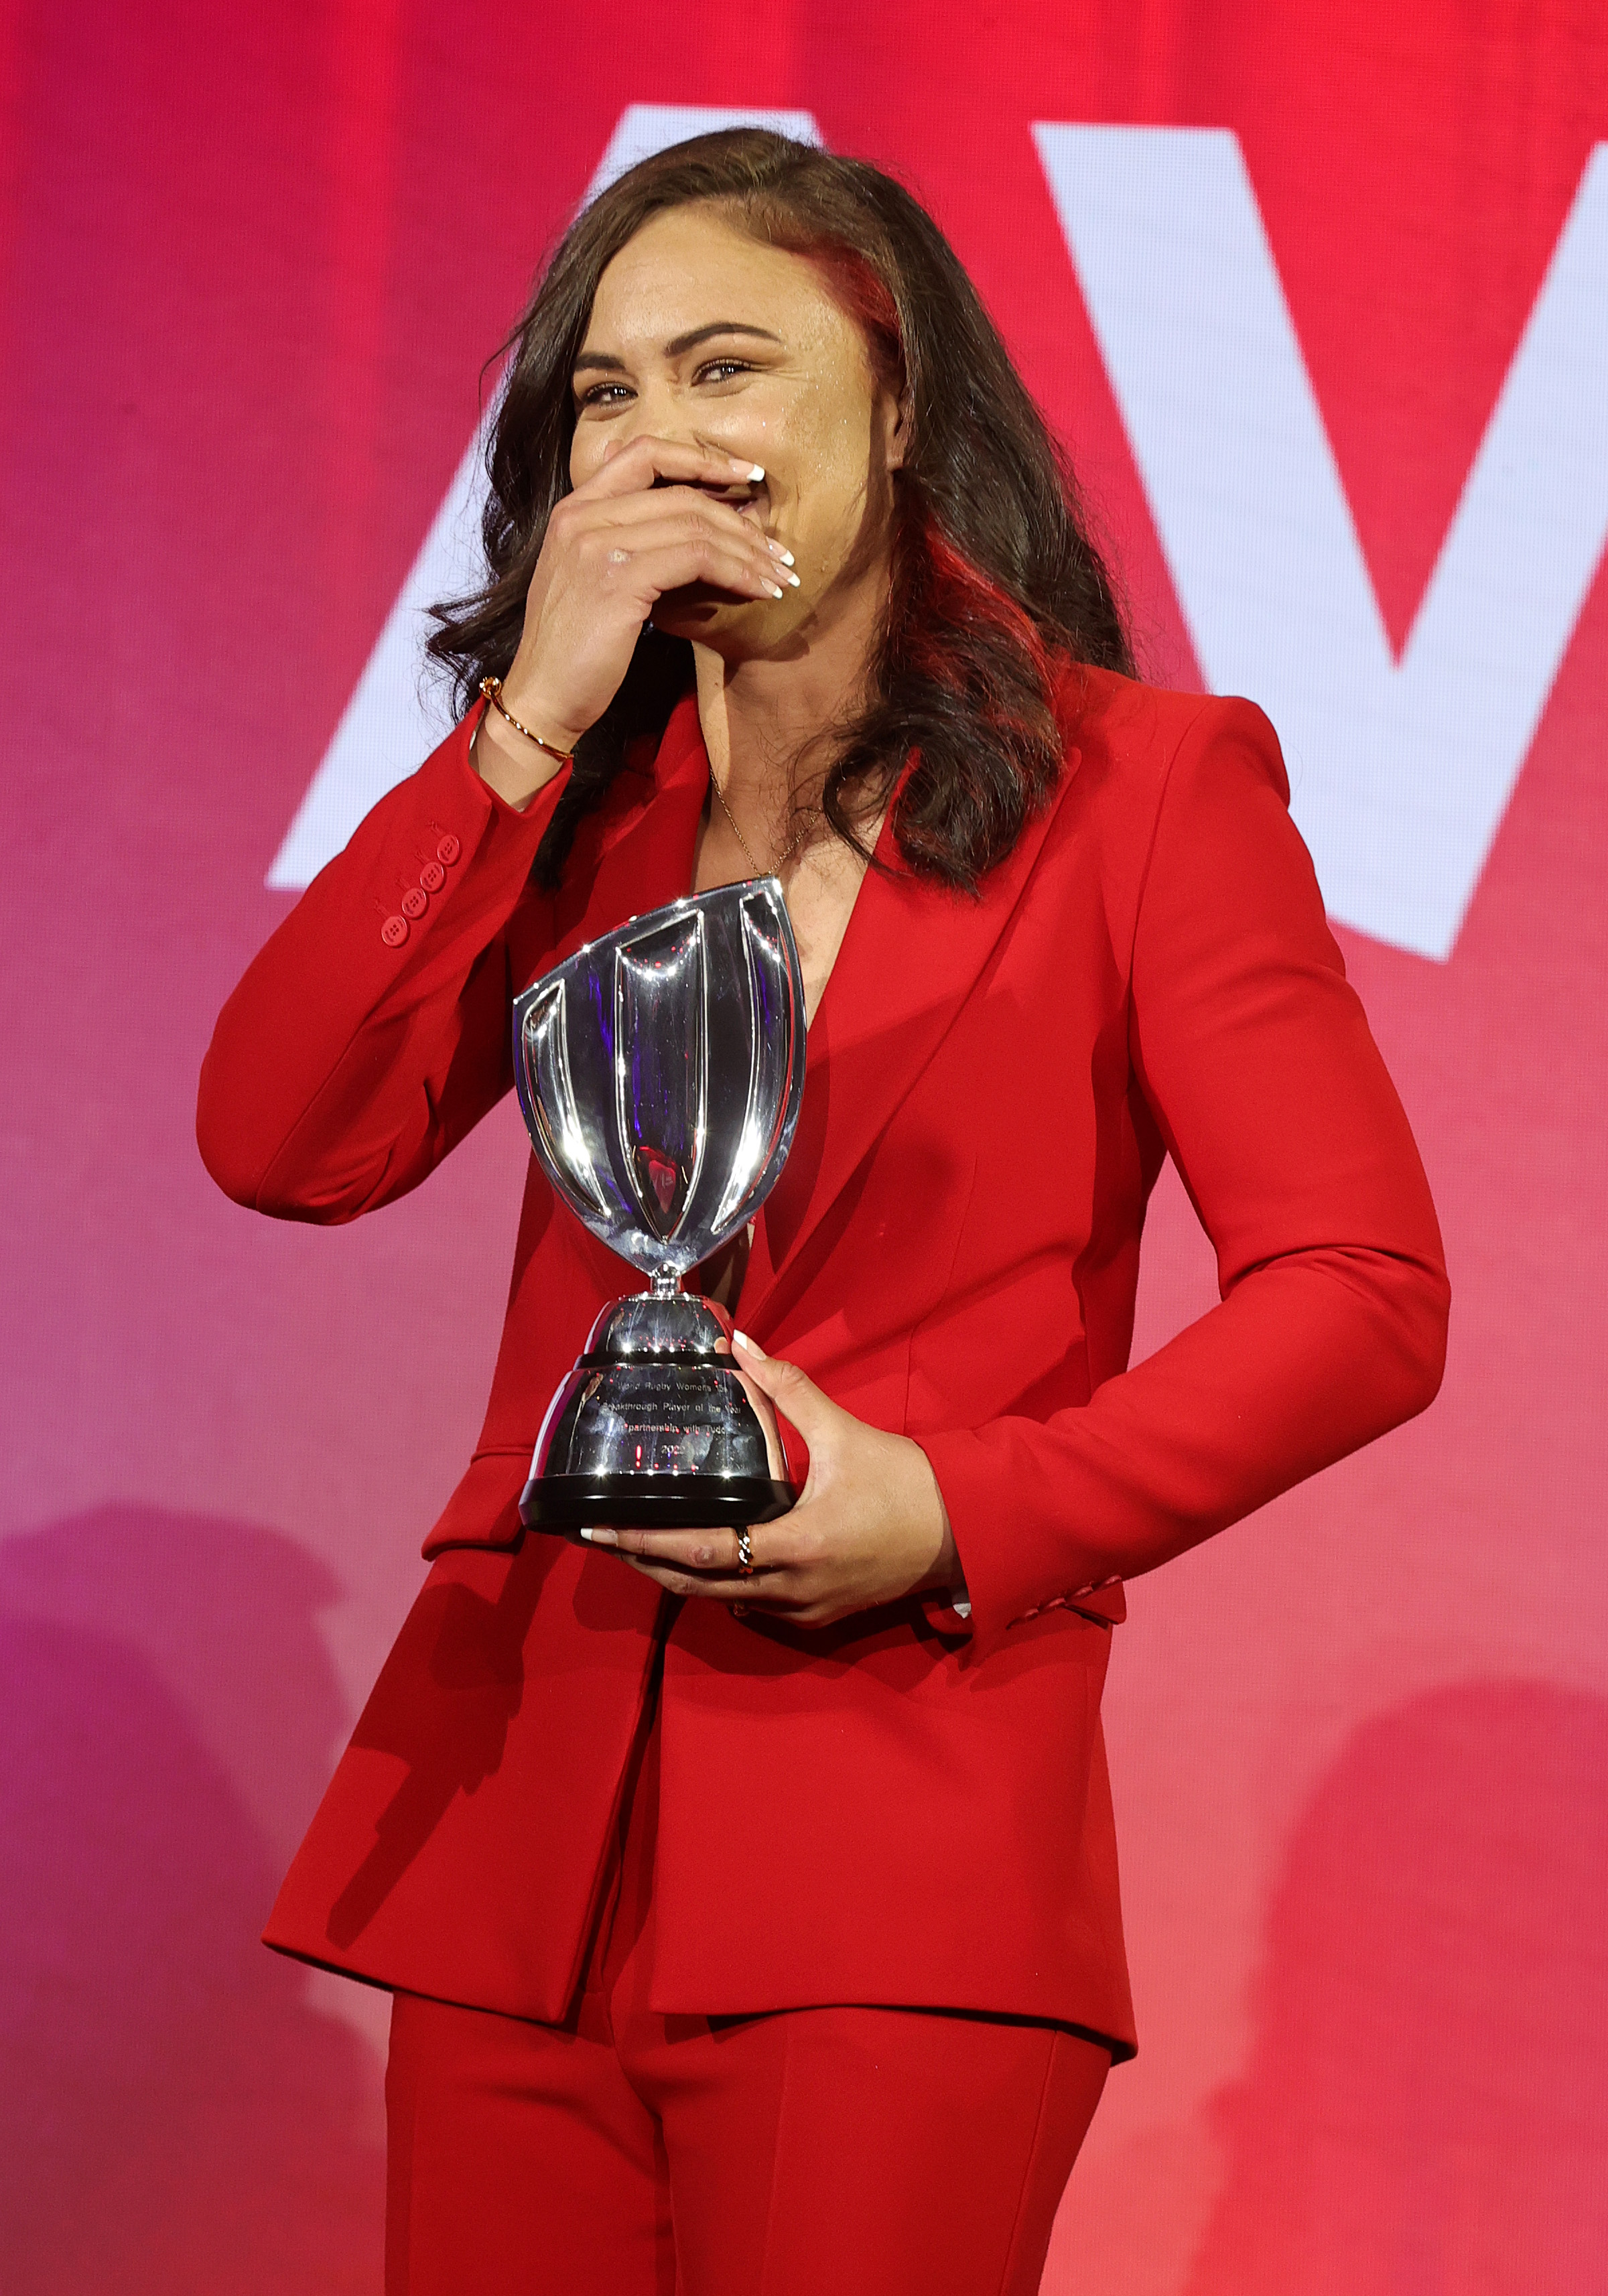 Ruby Tui offered a second World Cup medal after giving the original to a fan